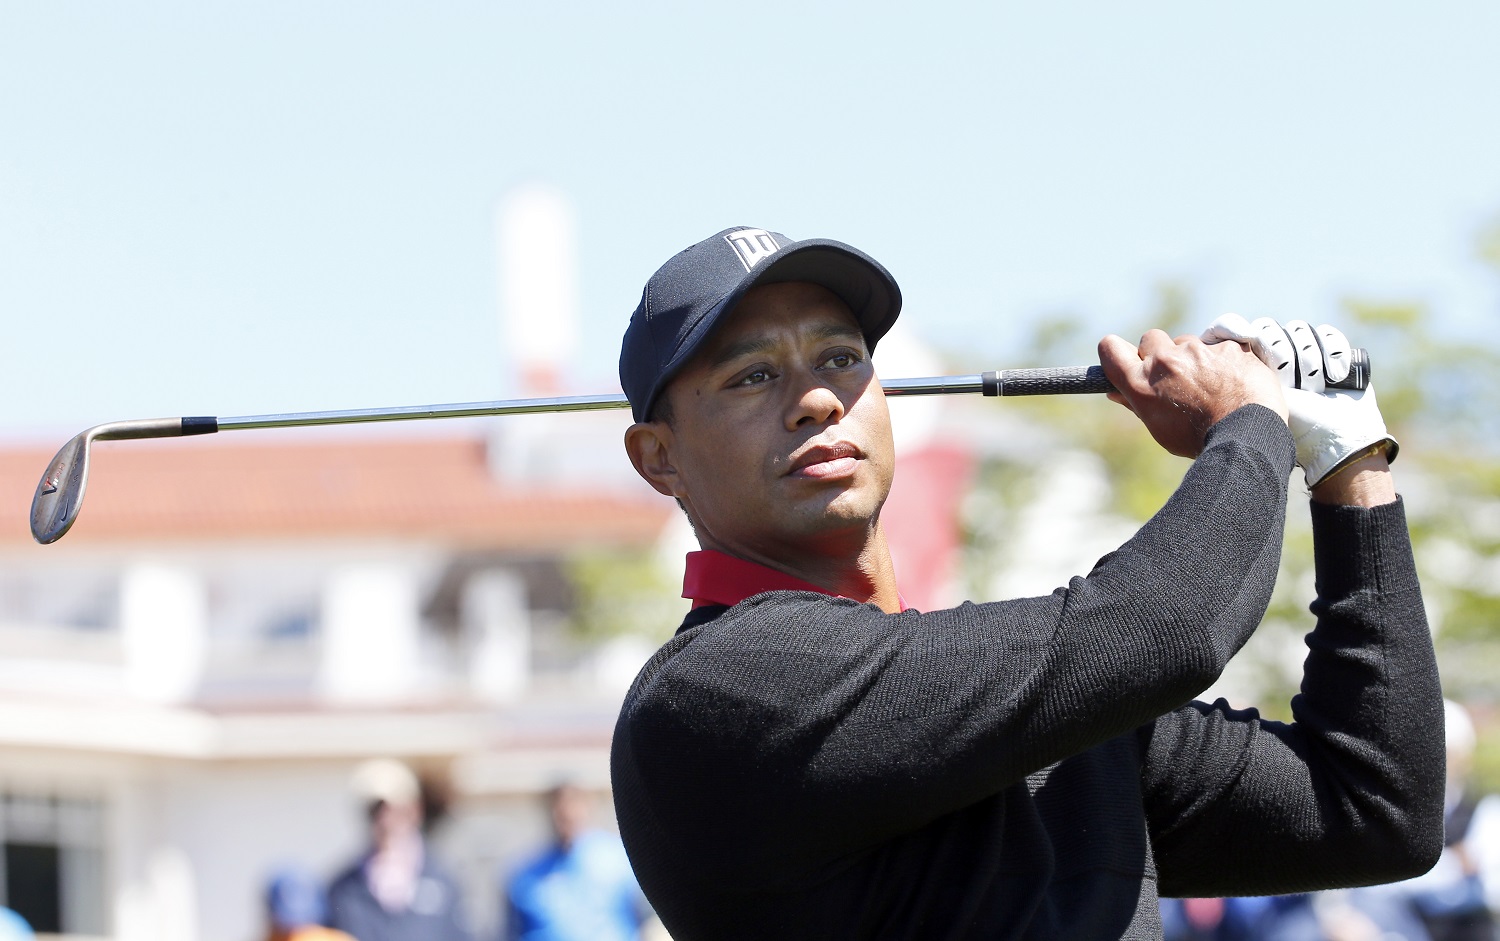 Tiger Woods takes a practice swing before hitting three ceremonial golf balls during a Quicken Loans National tournament media availability on the 10th tee at Congressional Country Club, Monday, May 16, 2016 in Bethesda, Md. (AP Photo/Alex Brandon)